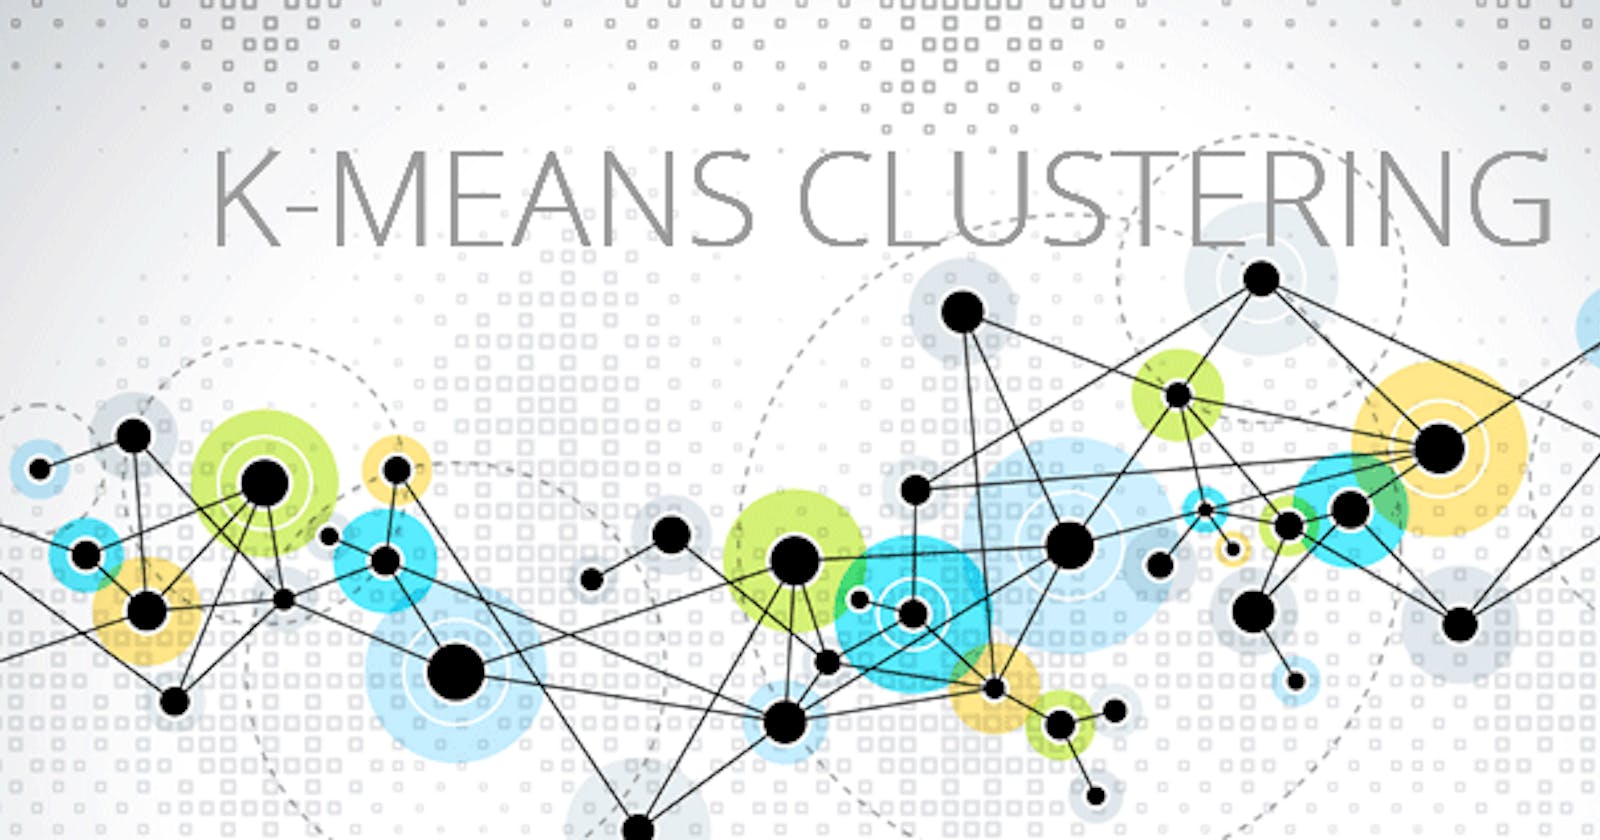 K-mean clustering and its Use-case in the security domain